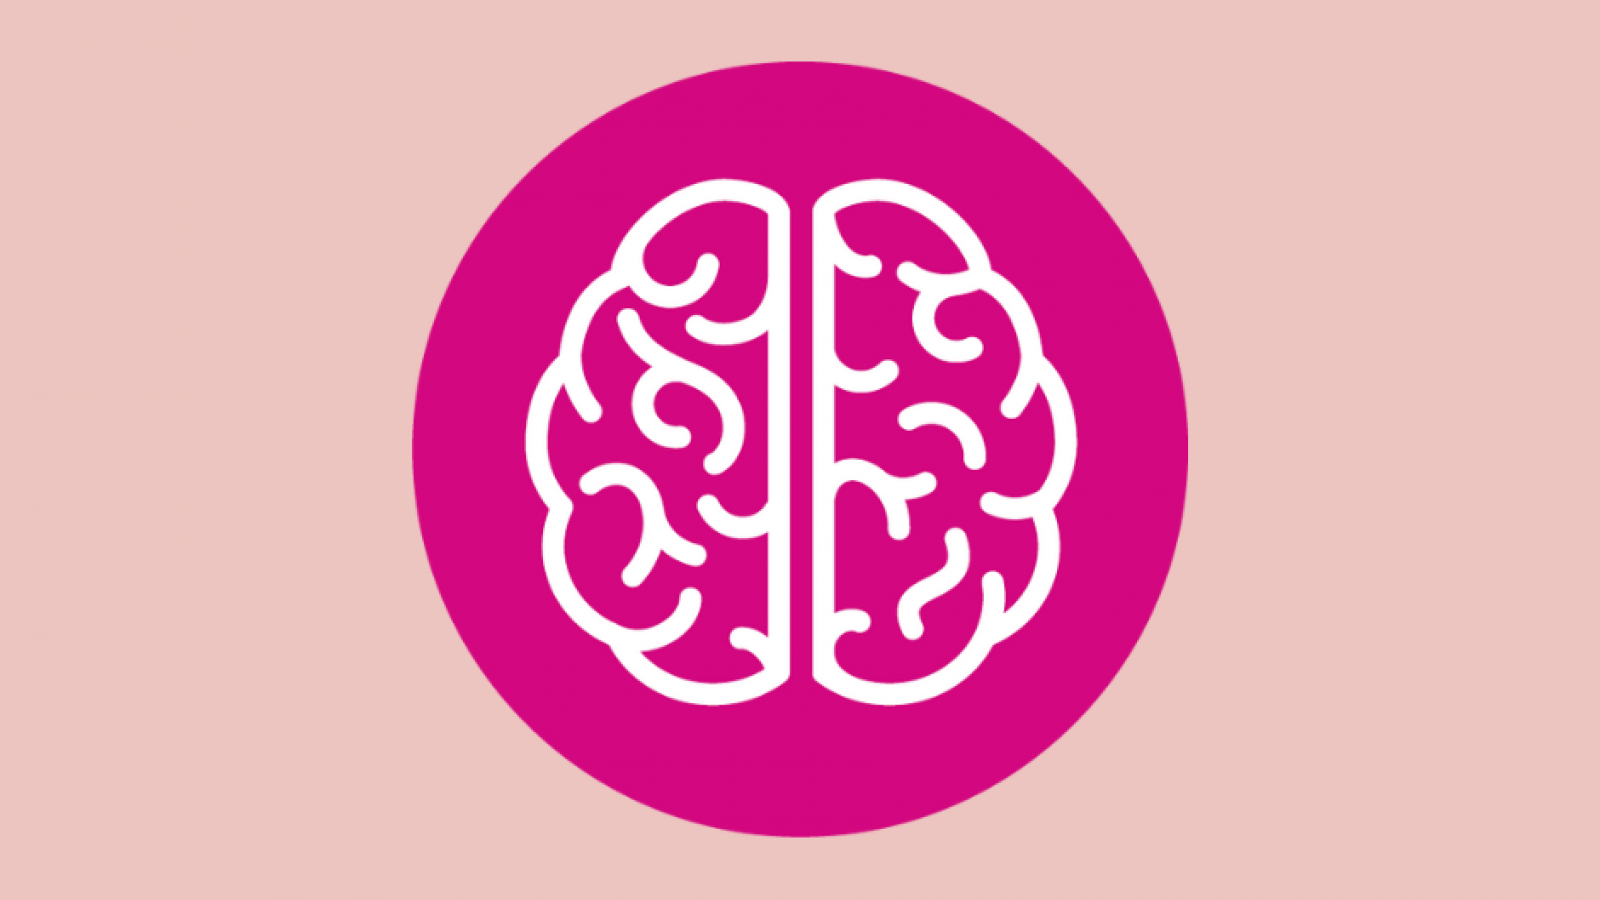 Icon of a brain in a pink circle